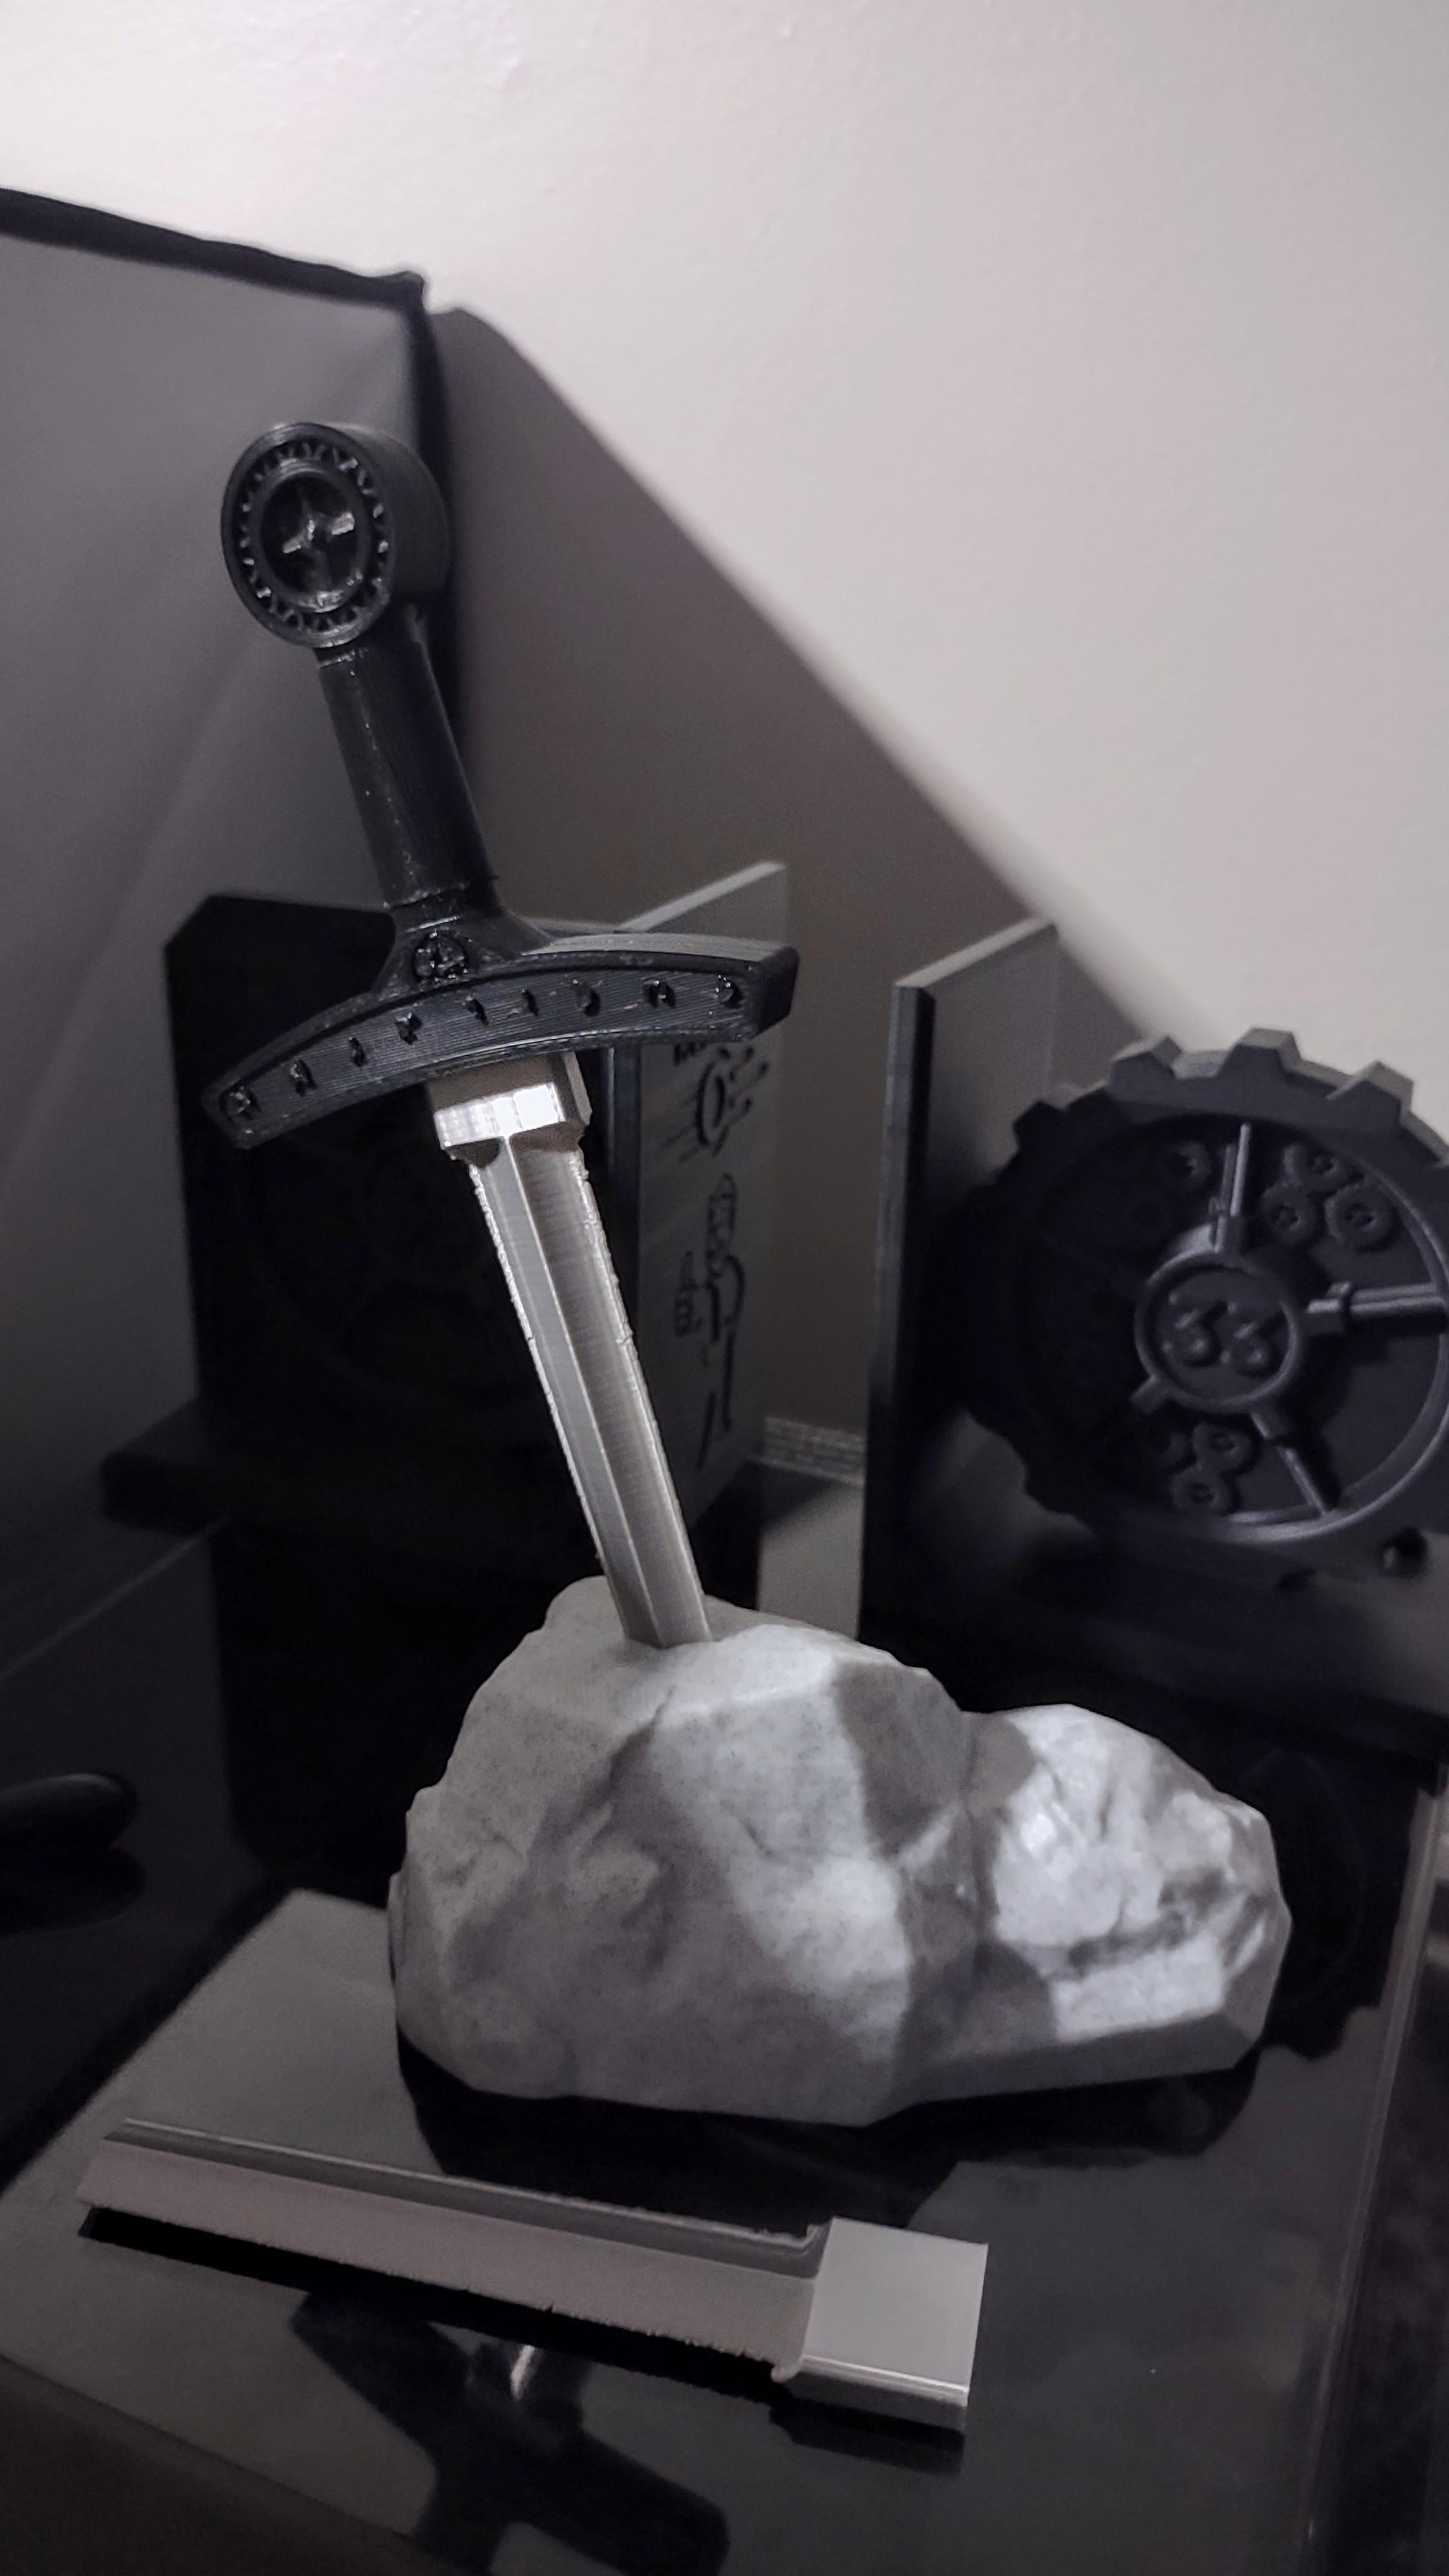 Excaliber - Sword in the Stone 3d model